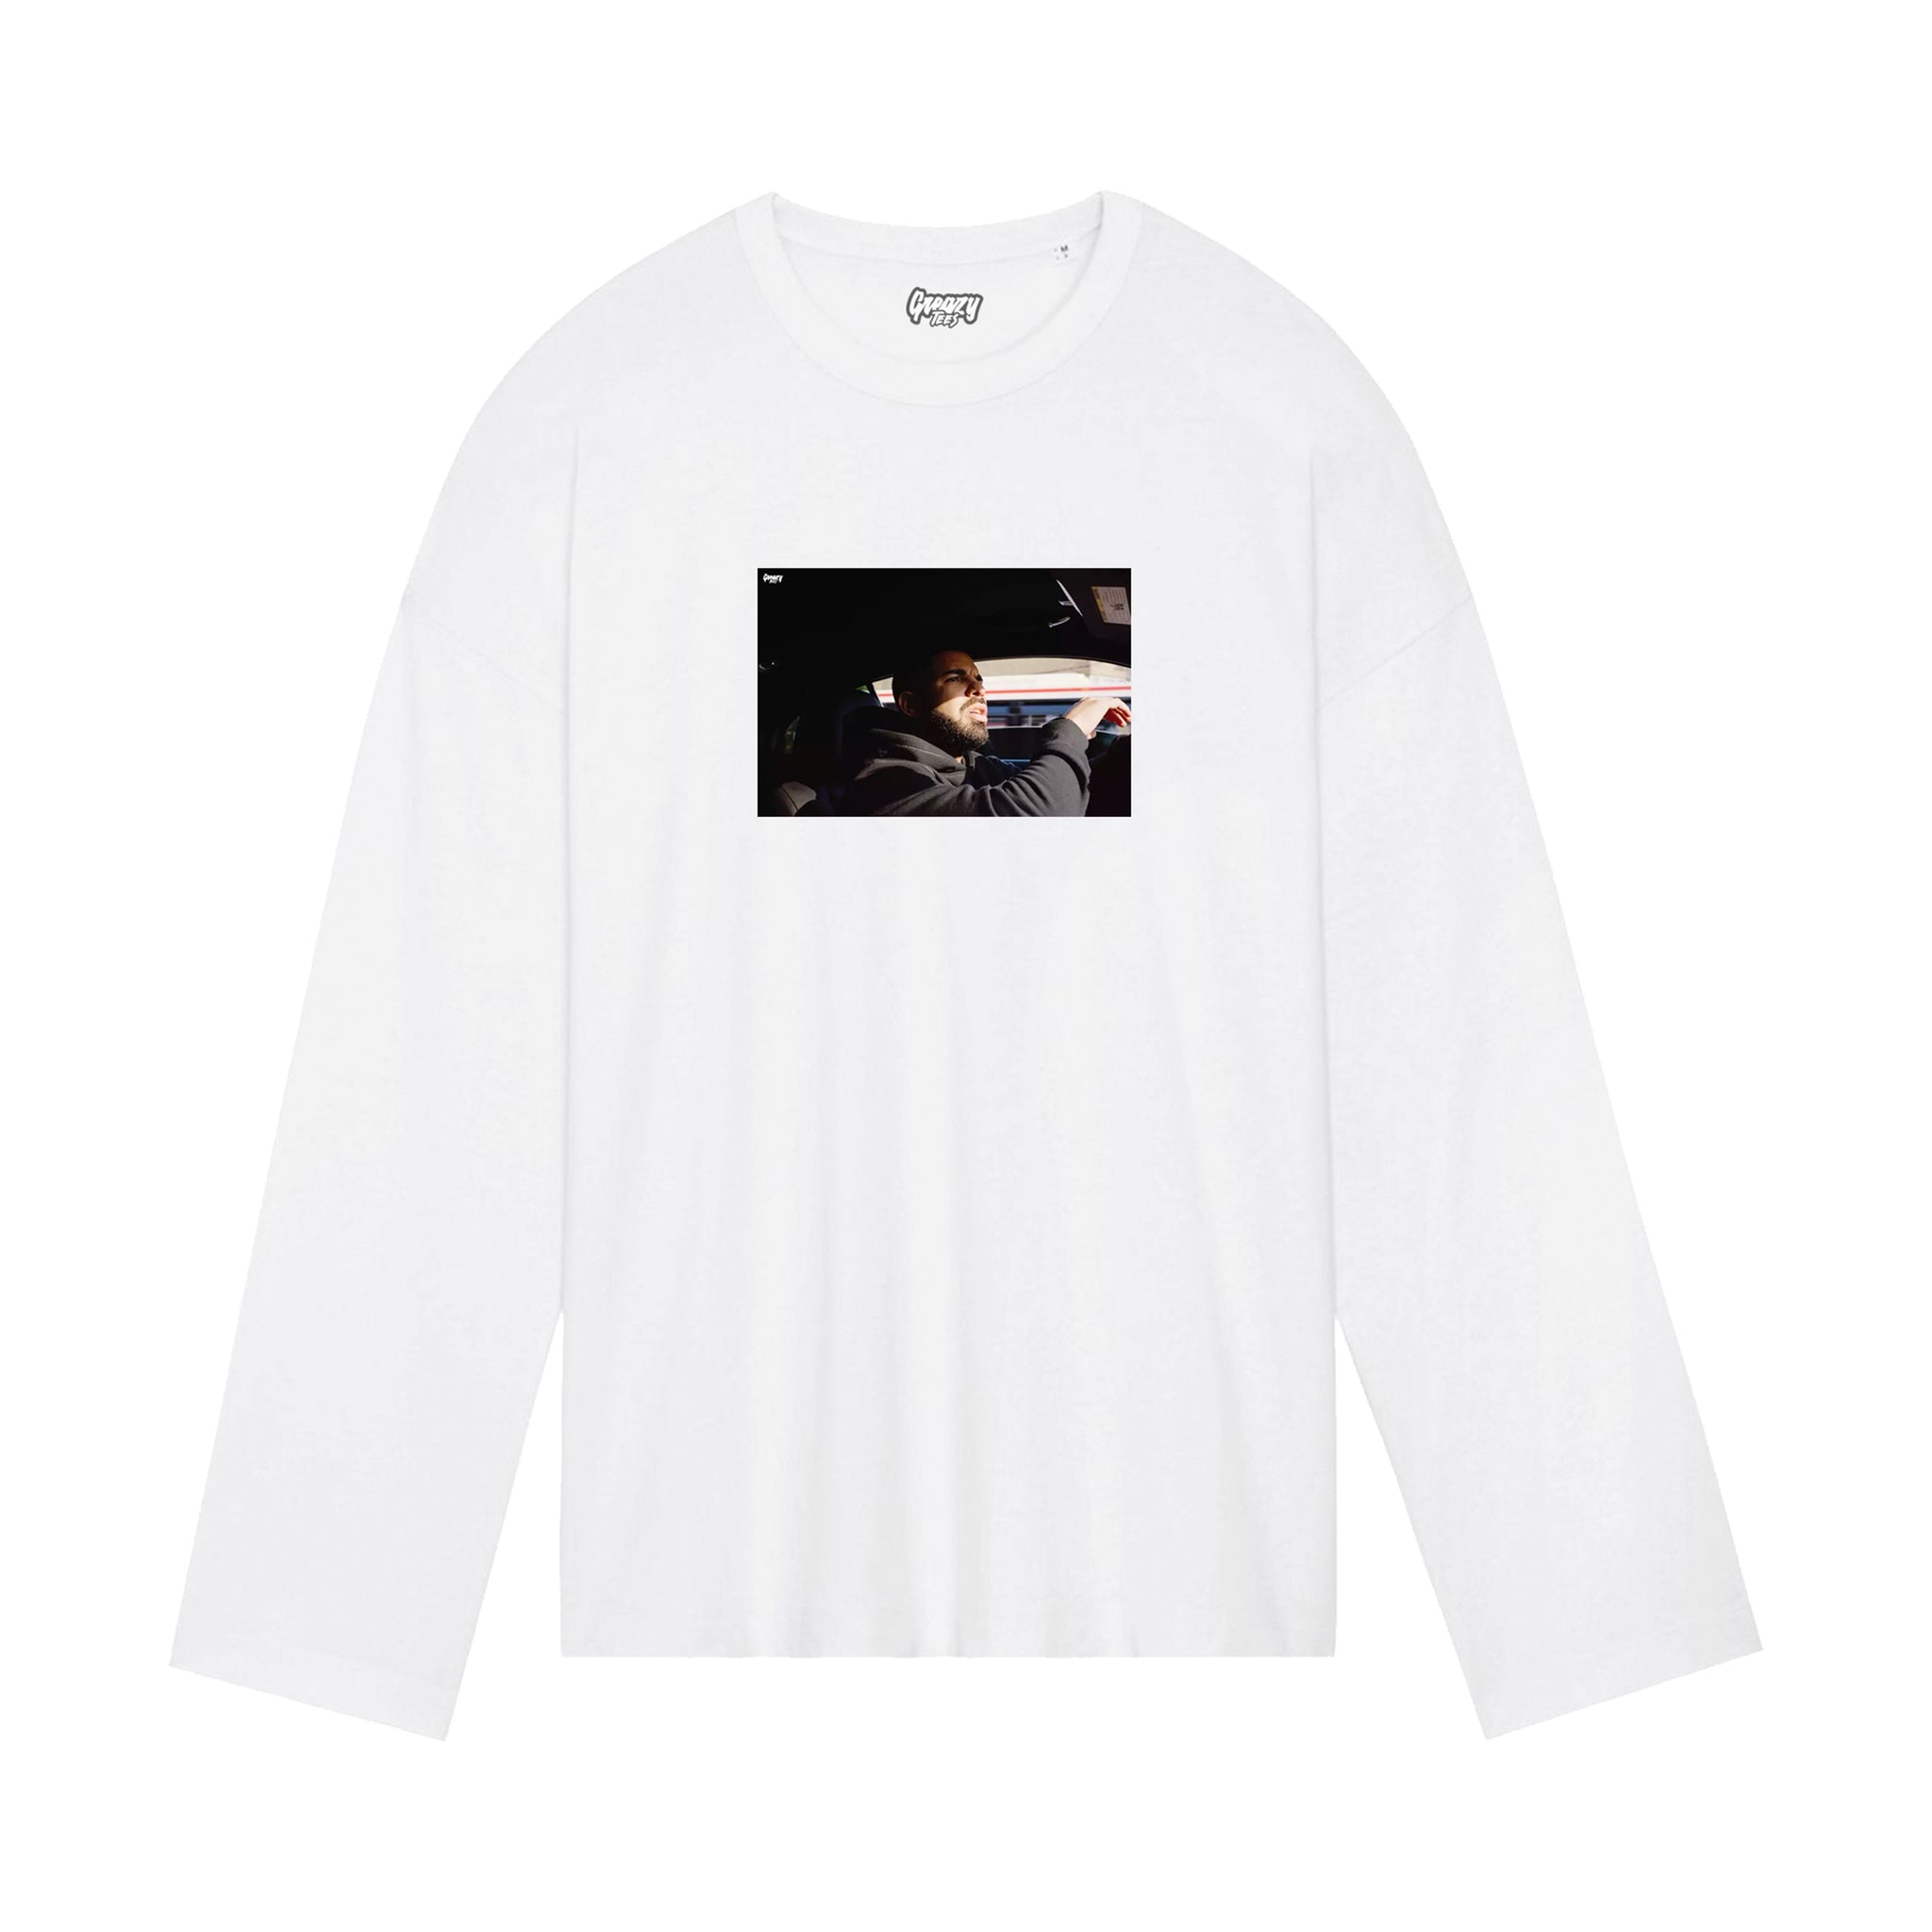 The Ride Long Sleeved Tee Tee Greazy Tees XS White Oversized